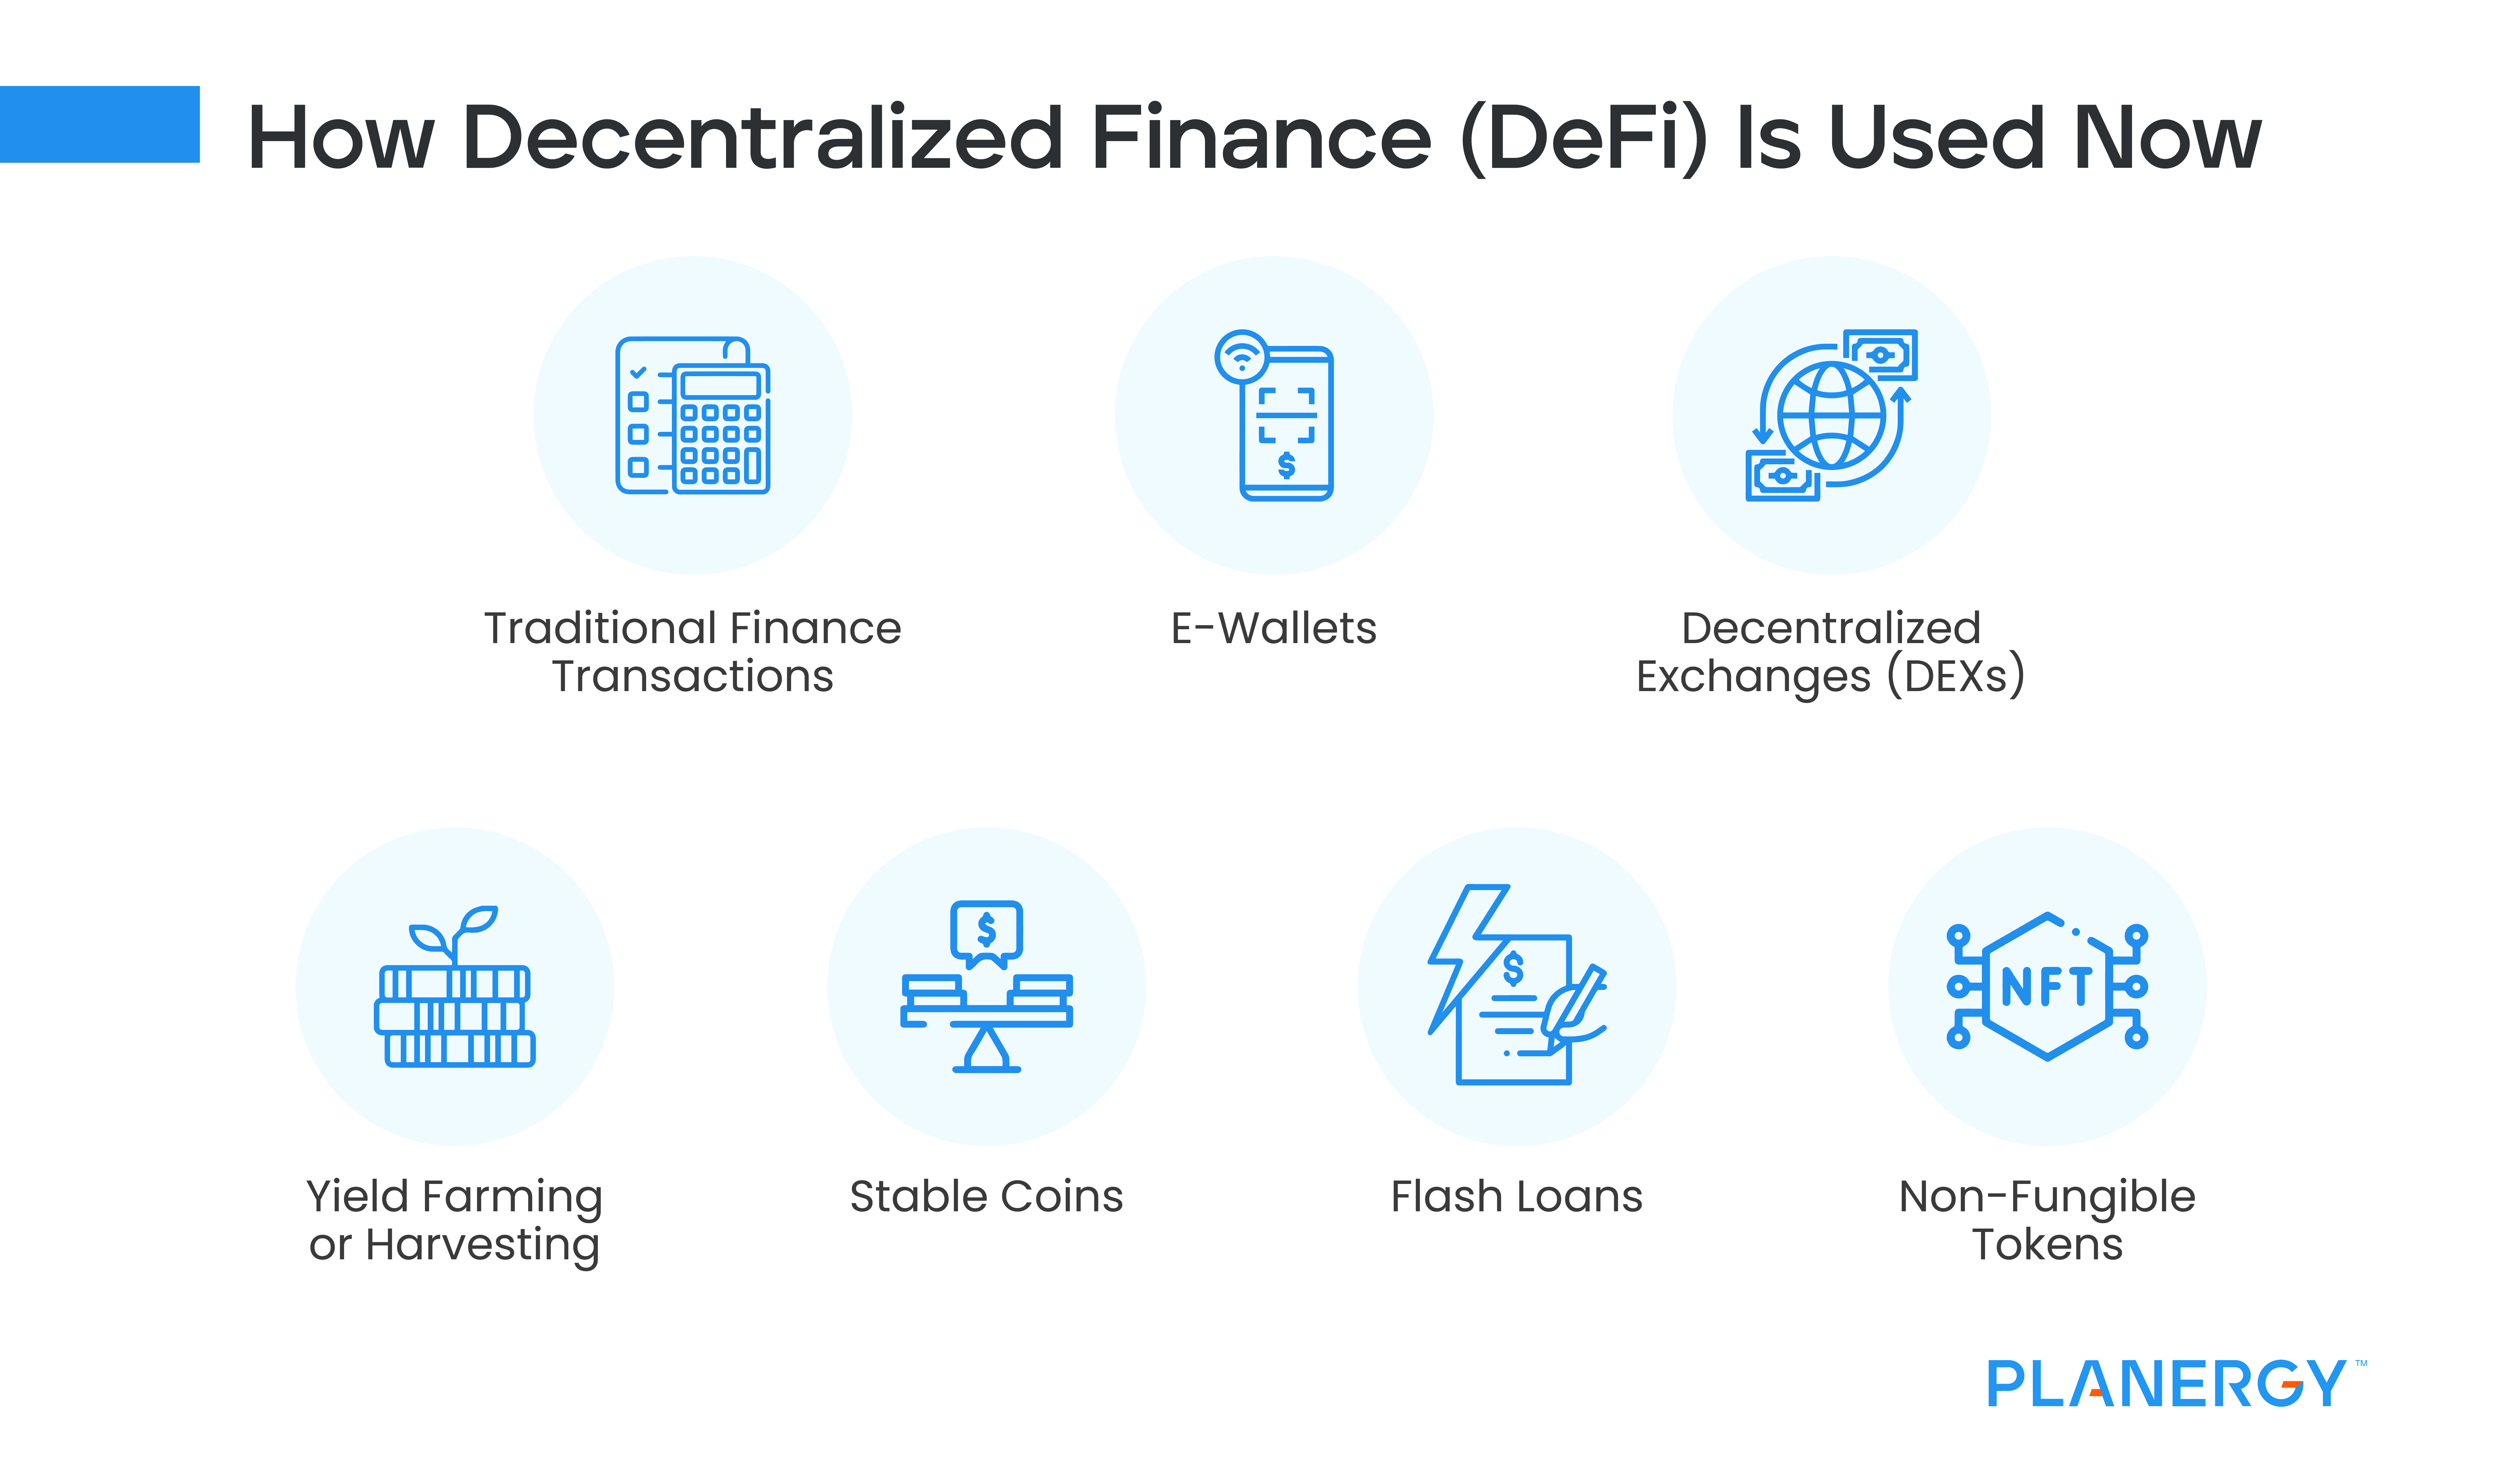 How DEFI Is Used Now